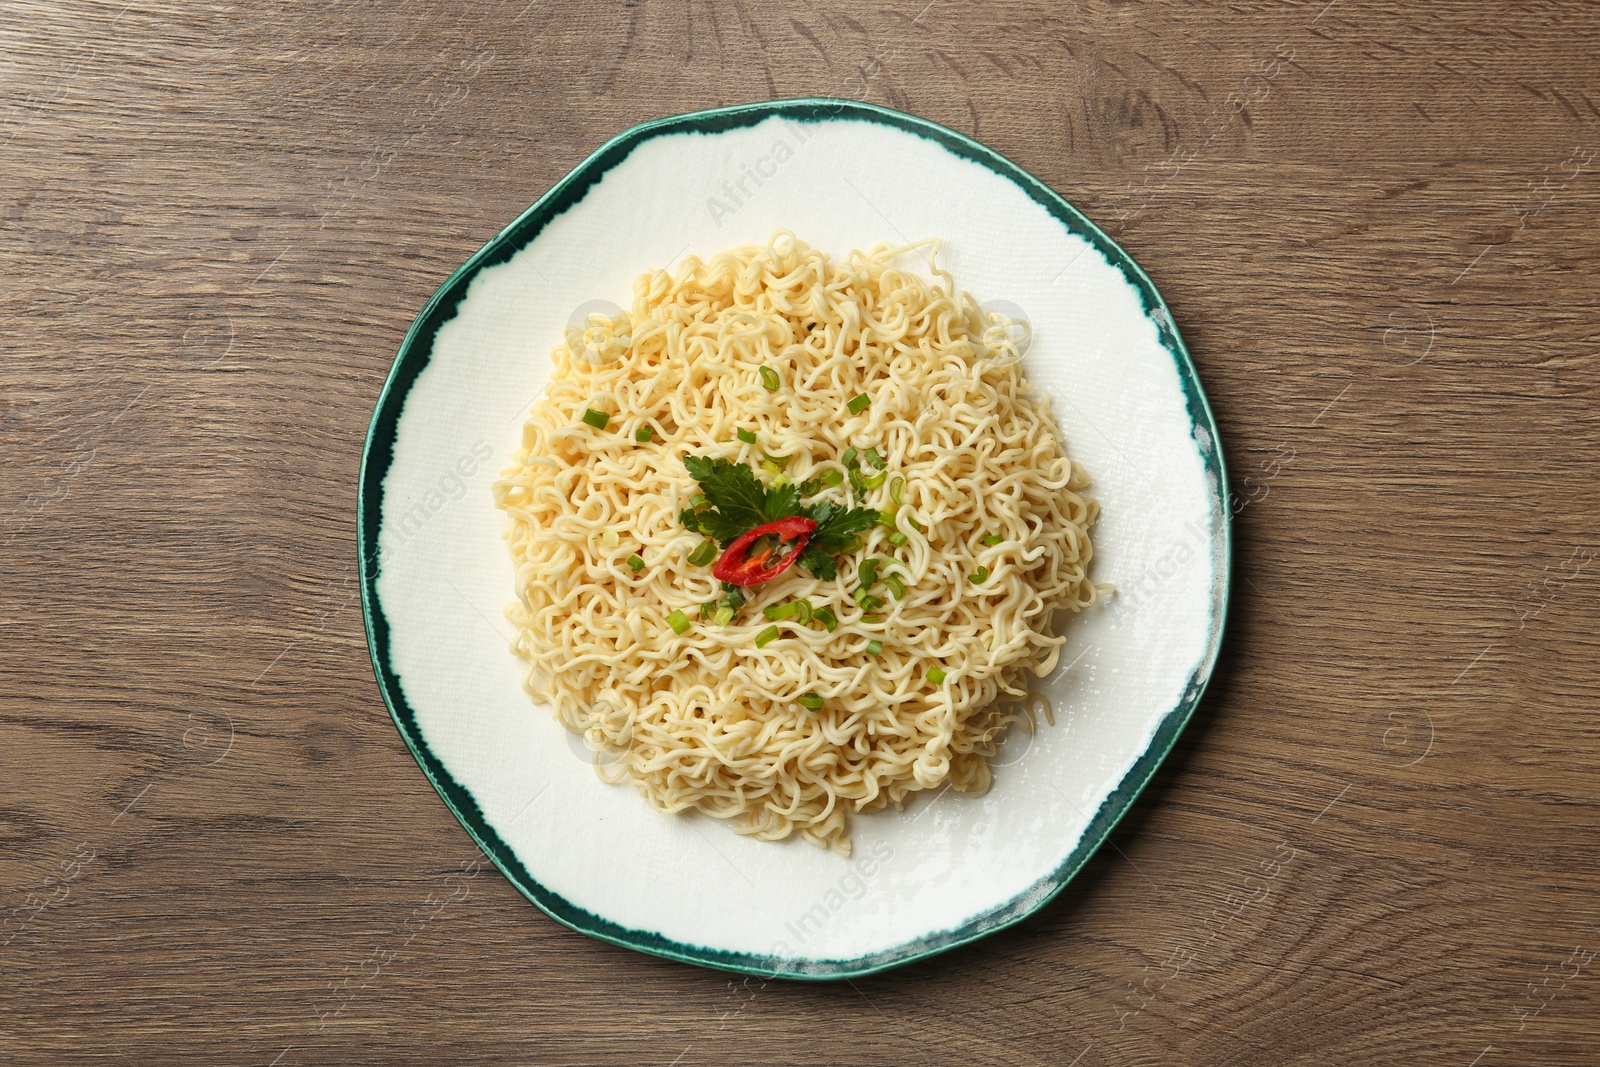 Photo of Plate of tasty noodles on wooden background, top view